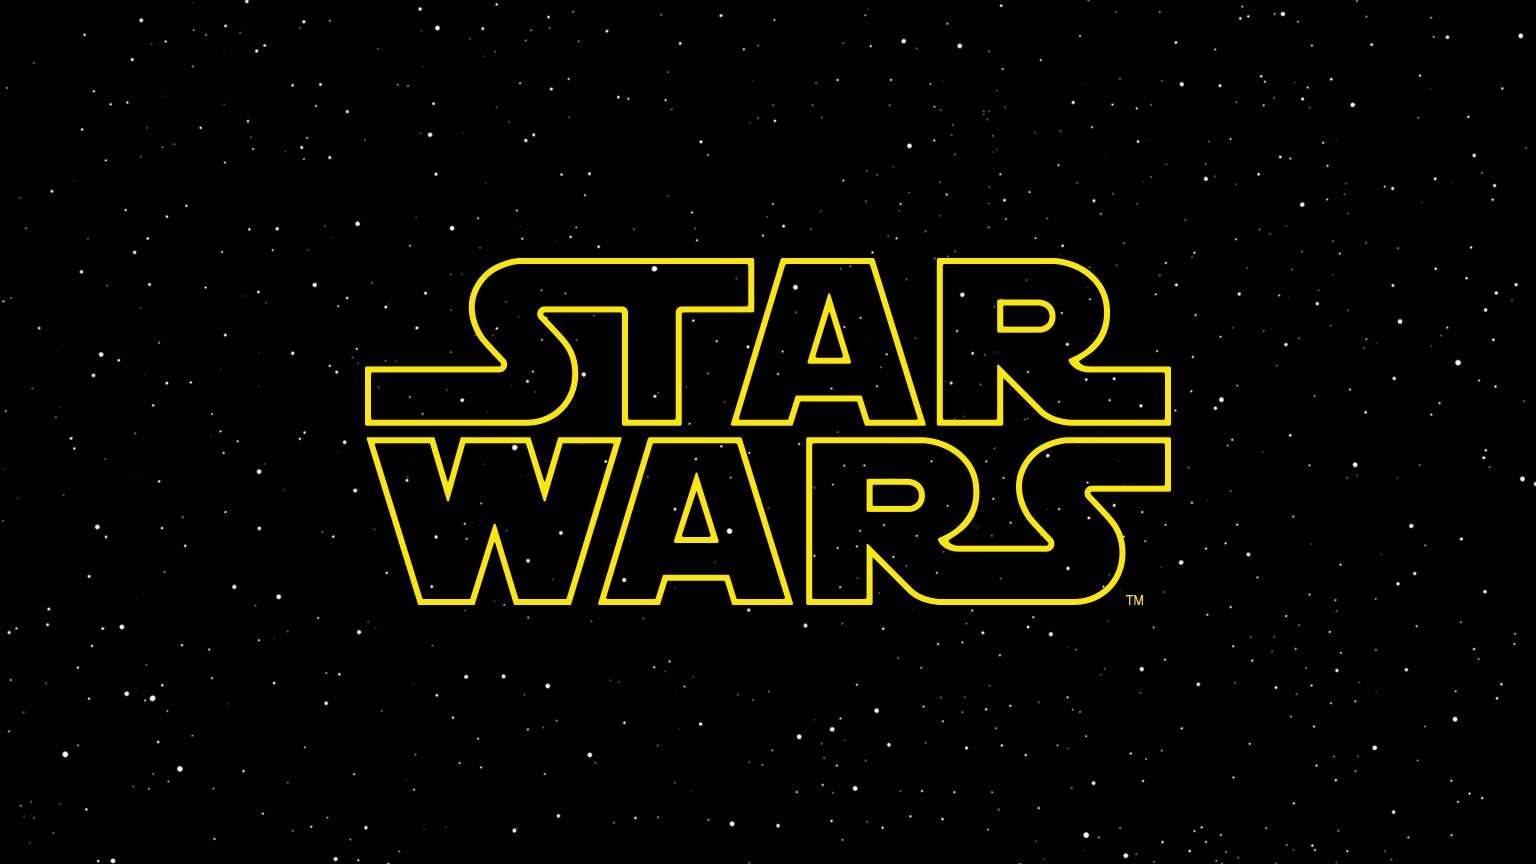 image for Game of Thrones Creators David Benioff and D.B. Weiss to Write and Produce a New Series of Star Wars Films